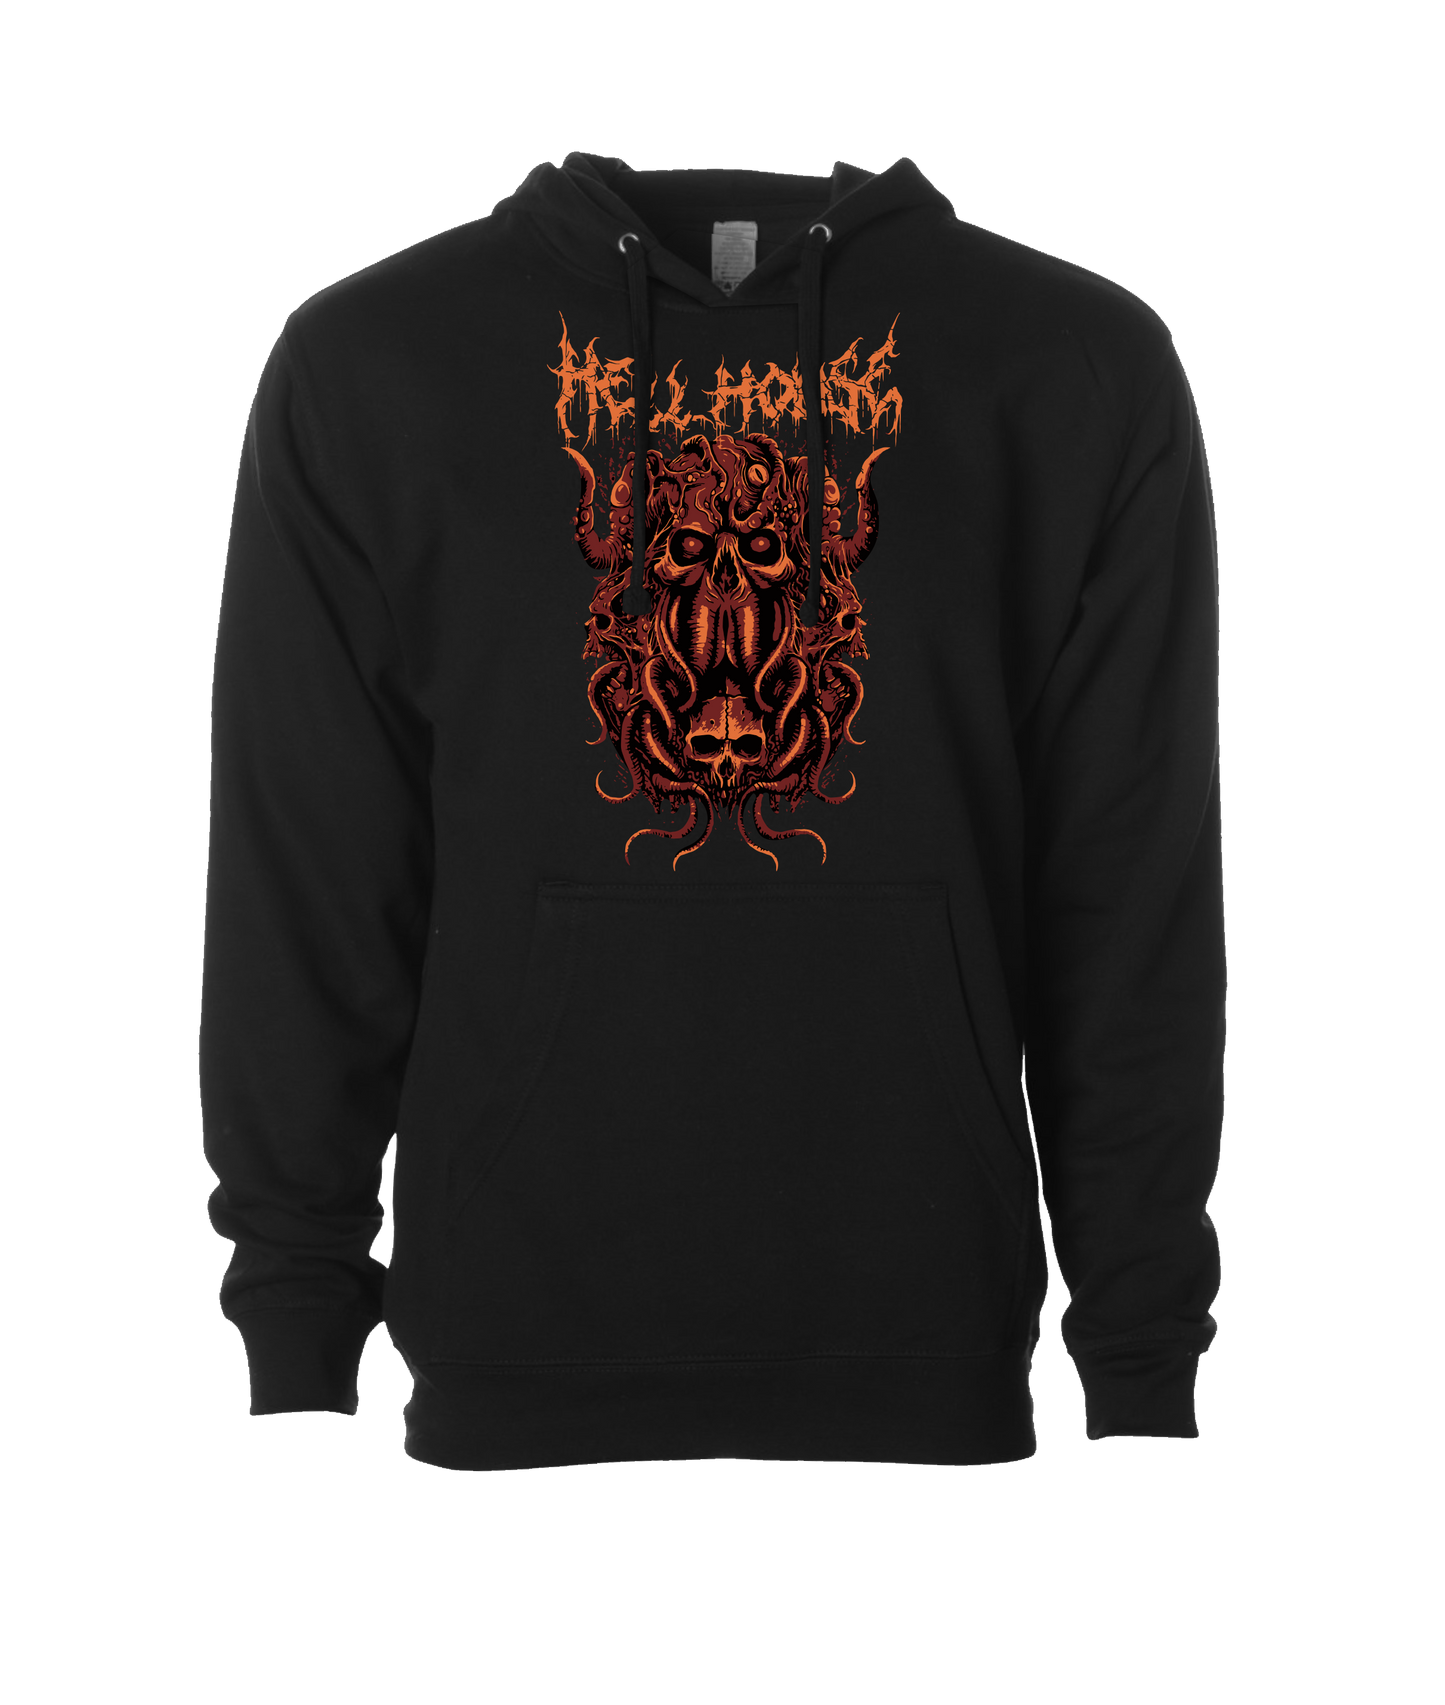 Hellhouse crypt - OCTOPUSSSKVLL - Black Hoodie